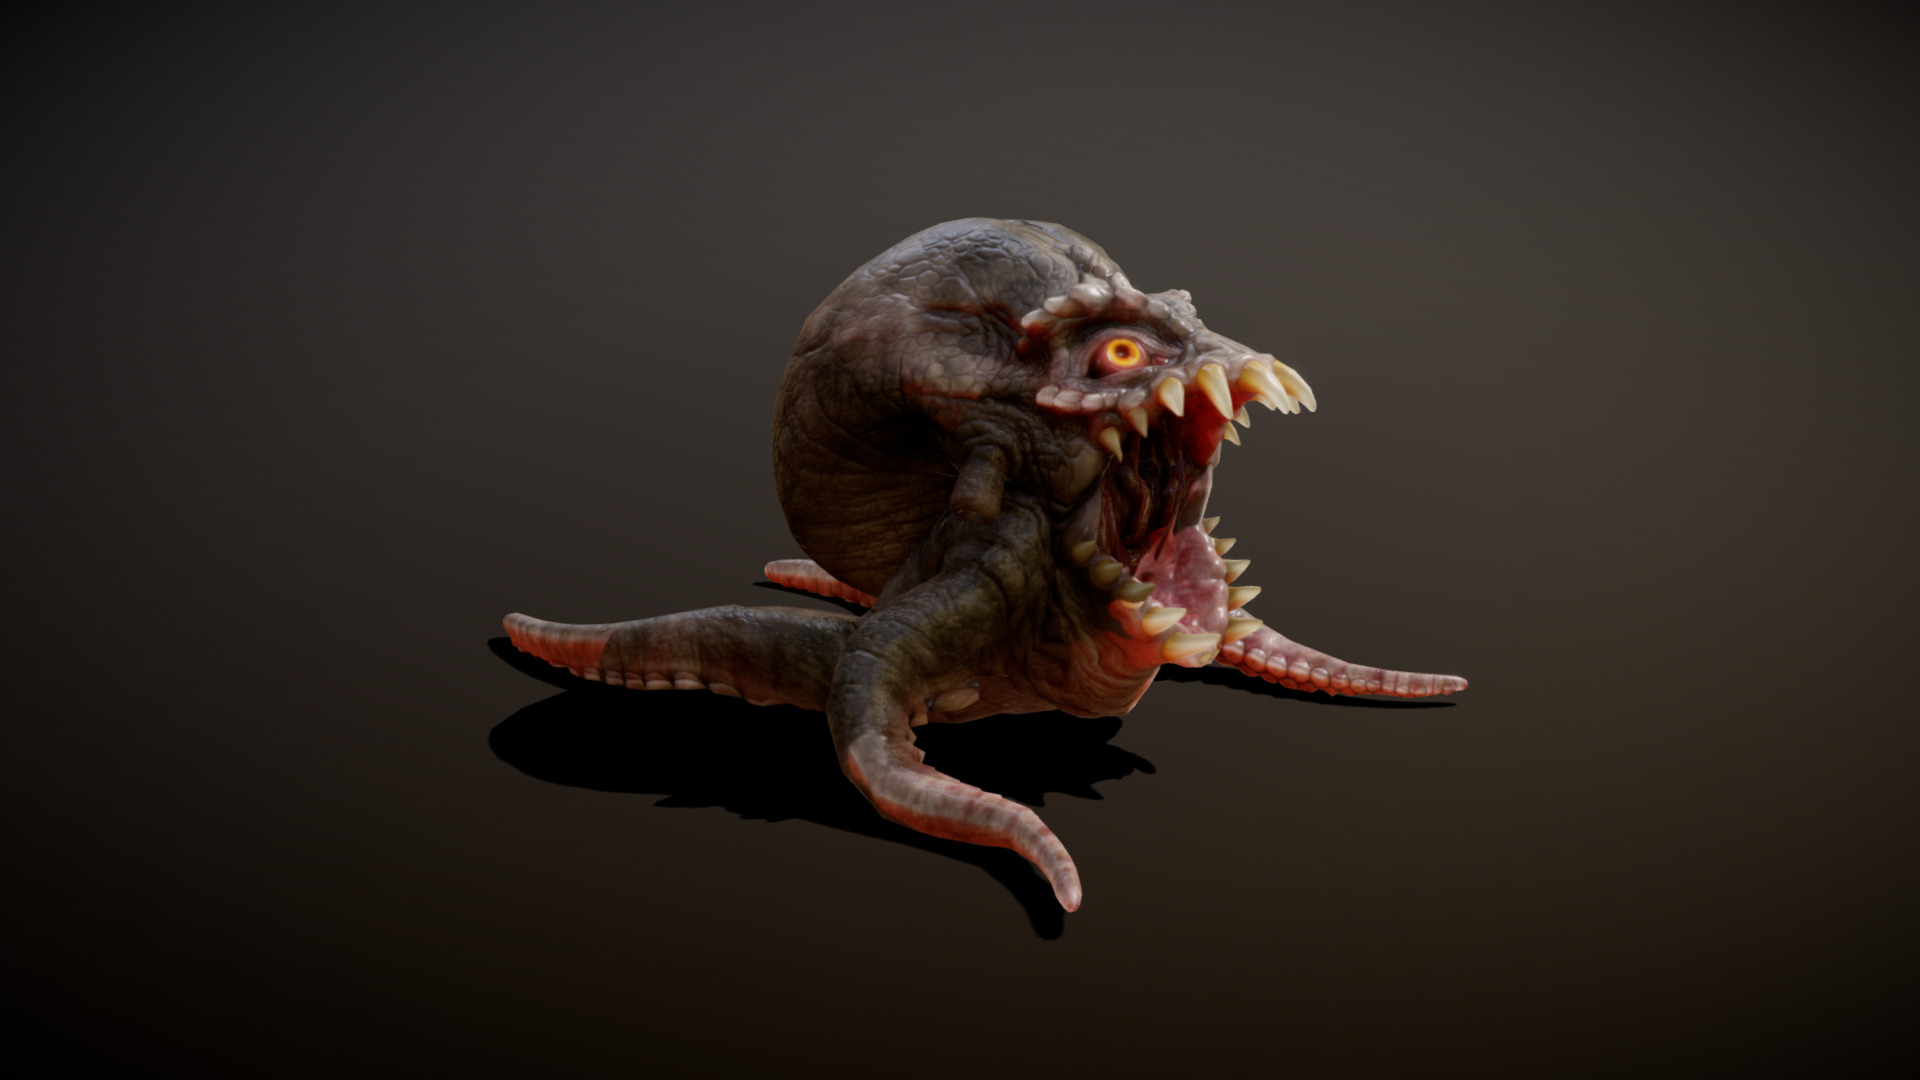 3D model TETRAPUSS ANIMATIONS - This is a 3D model of the TETRAPUSS ANIMATIONS. The 3D model is about a small reptile with a large mouth.